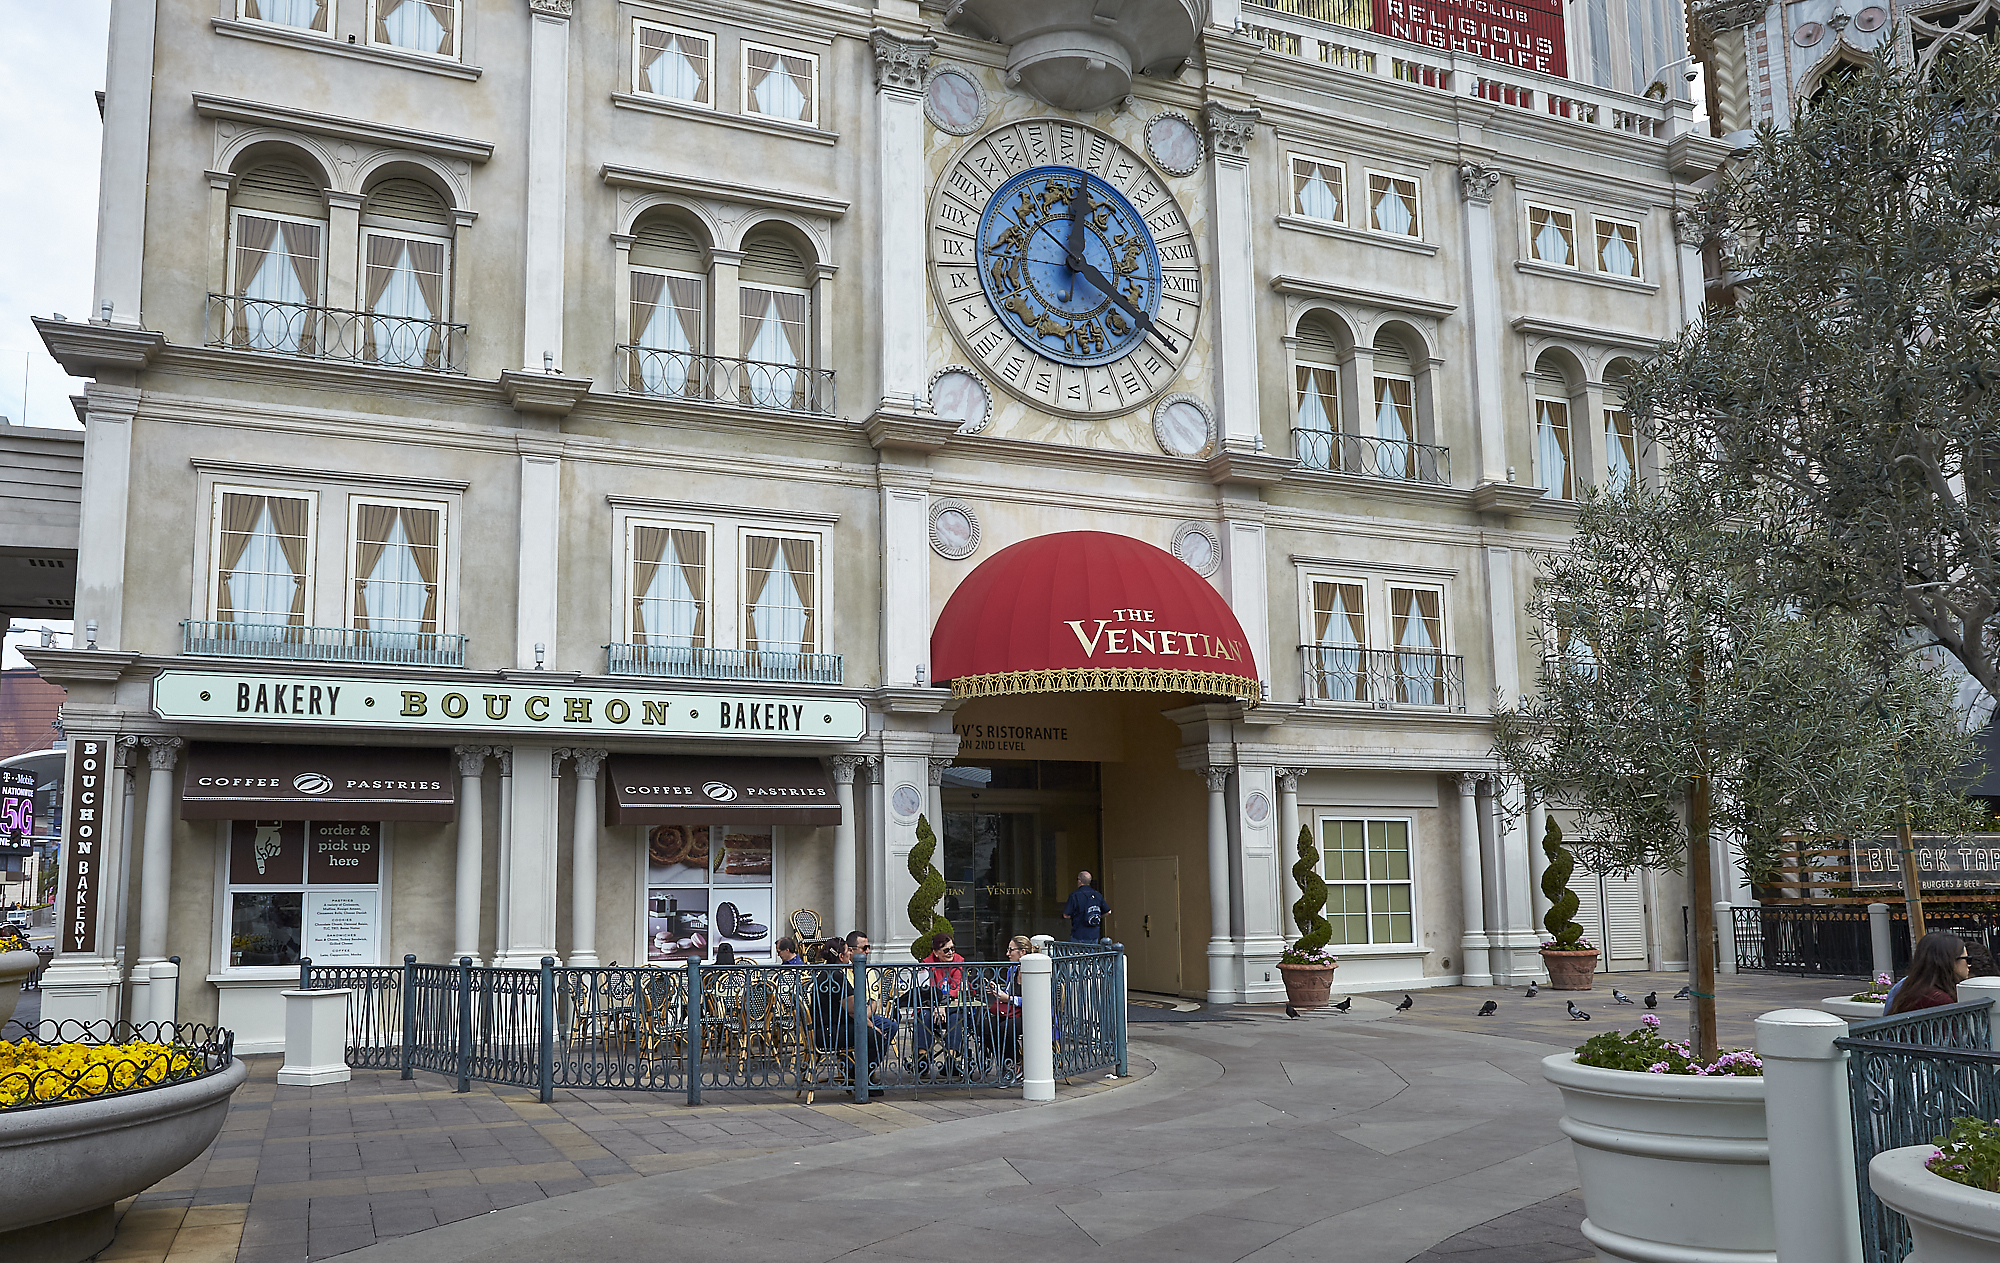 Ad Art Sign Co., AdArt, Full Service Signage, LED Lighting, Digital Signage,Hospitality, Signage, Custom Printed Awning, Face Lit Cabinet with Vinyl Overlay Graphics, Non-Illuminated FCO (Flat Cut Out) Panel Sign, The Venetian Resort & Casino, Las Vegas, NV